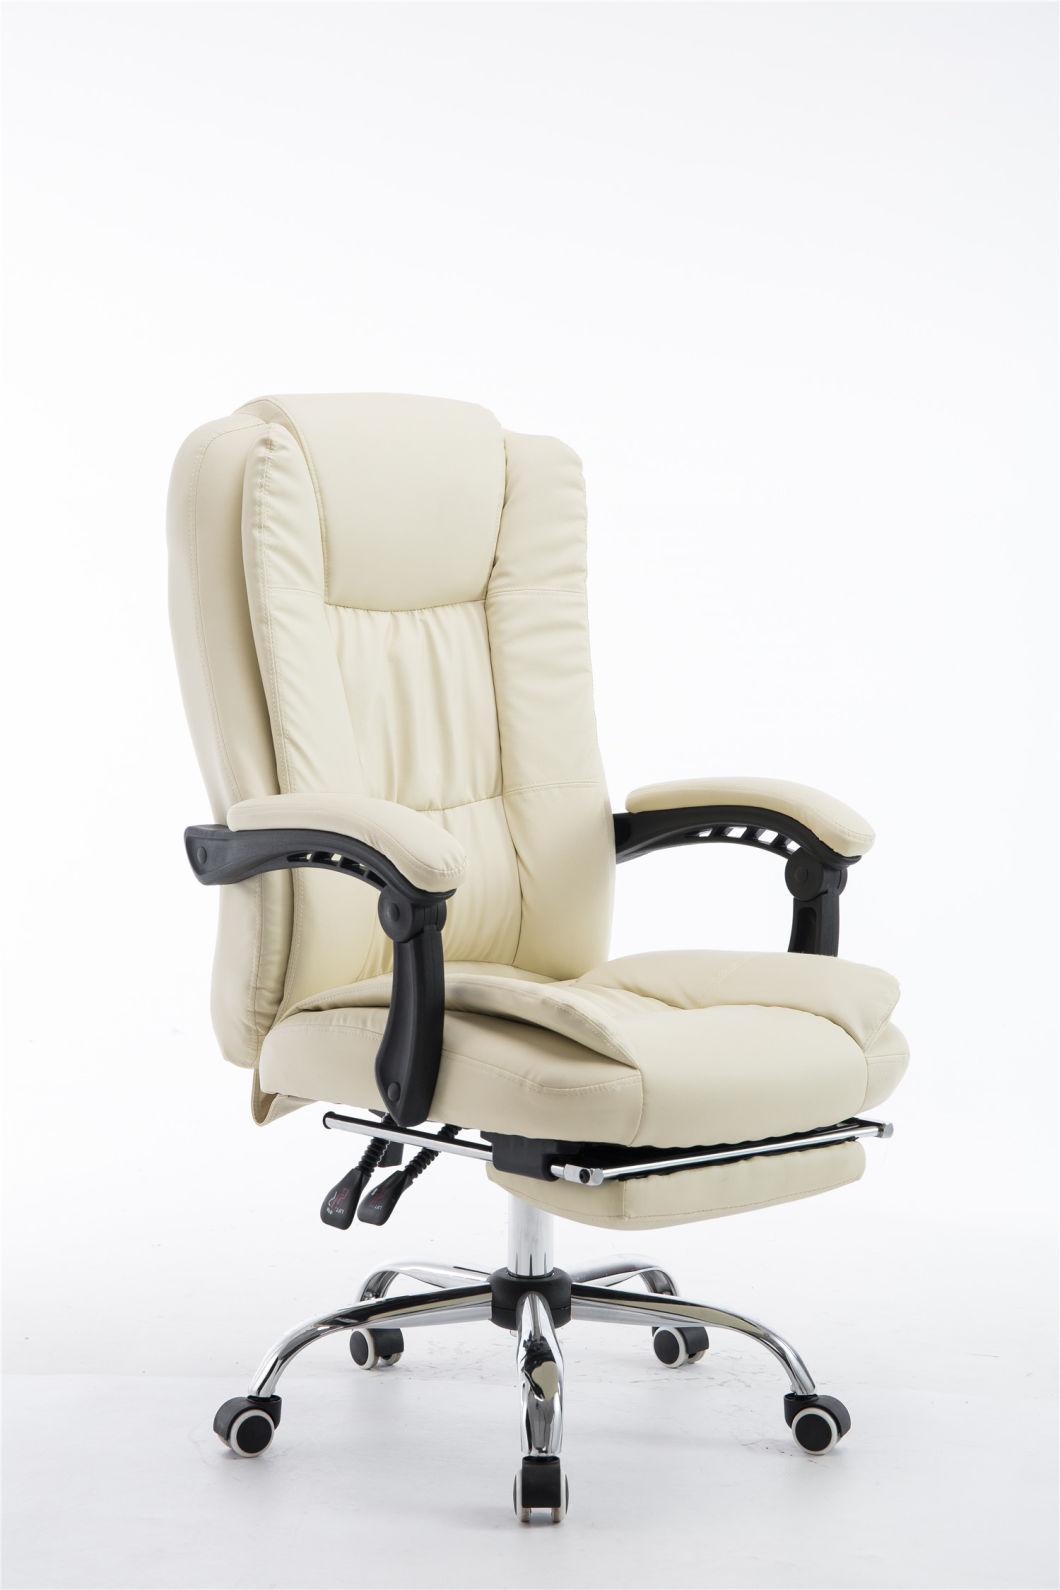 Wholesale High Quality Luxury Ergonomic Light Brown PU Leather Modern Computer Office Executive Chairs